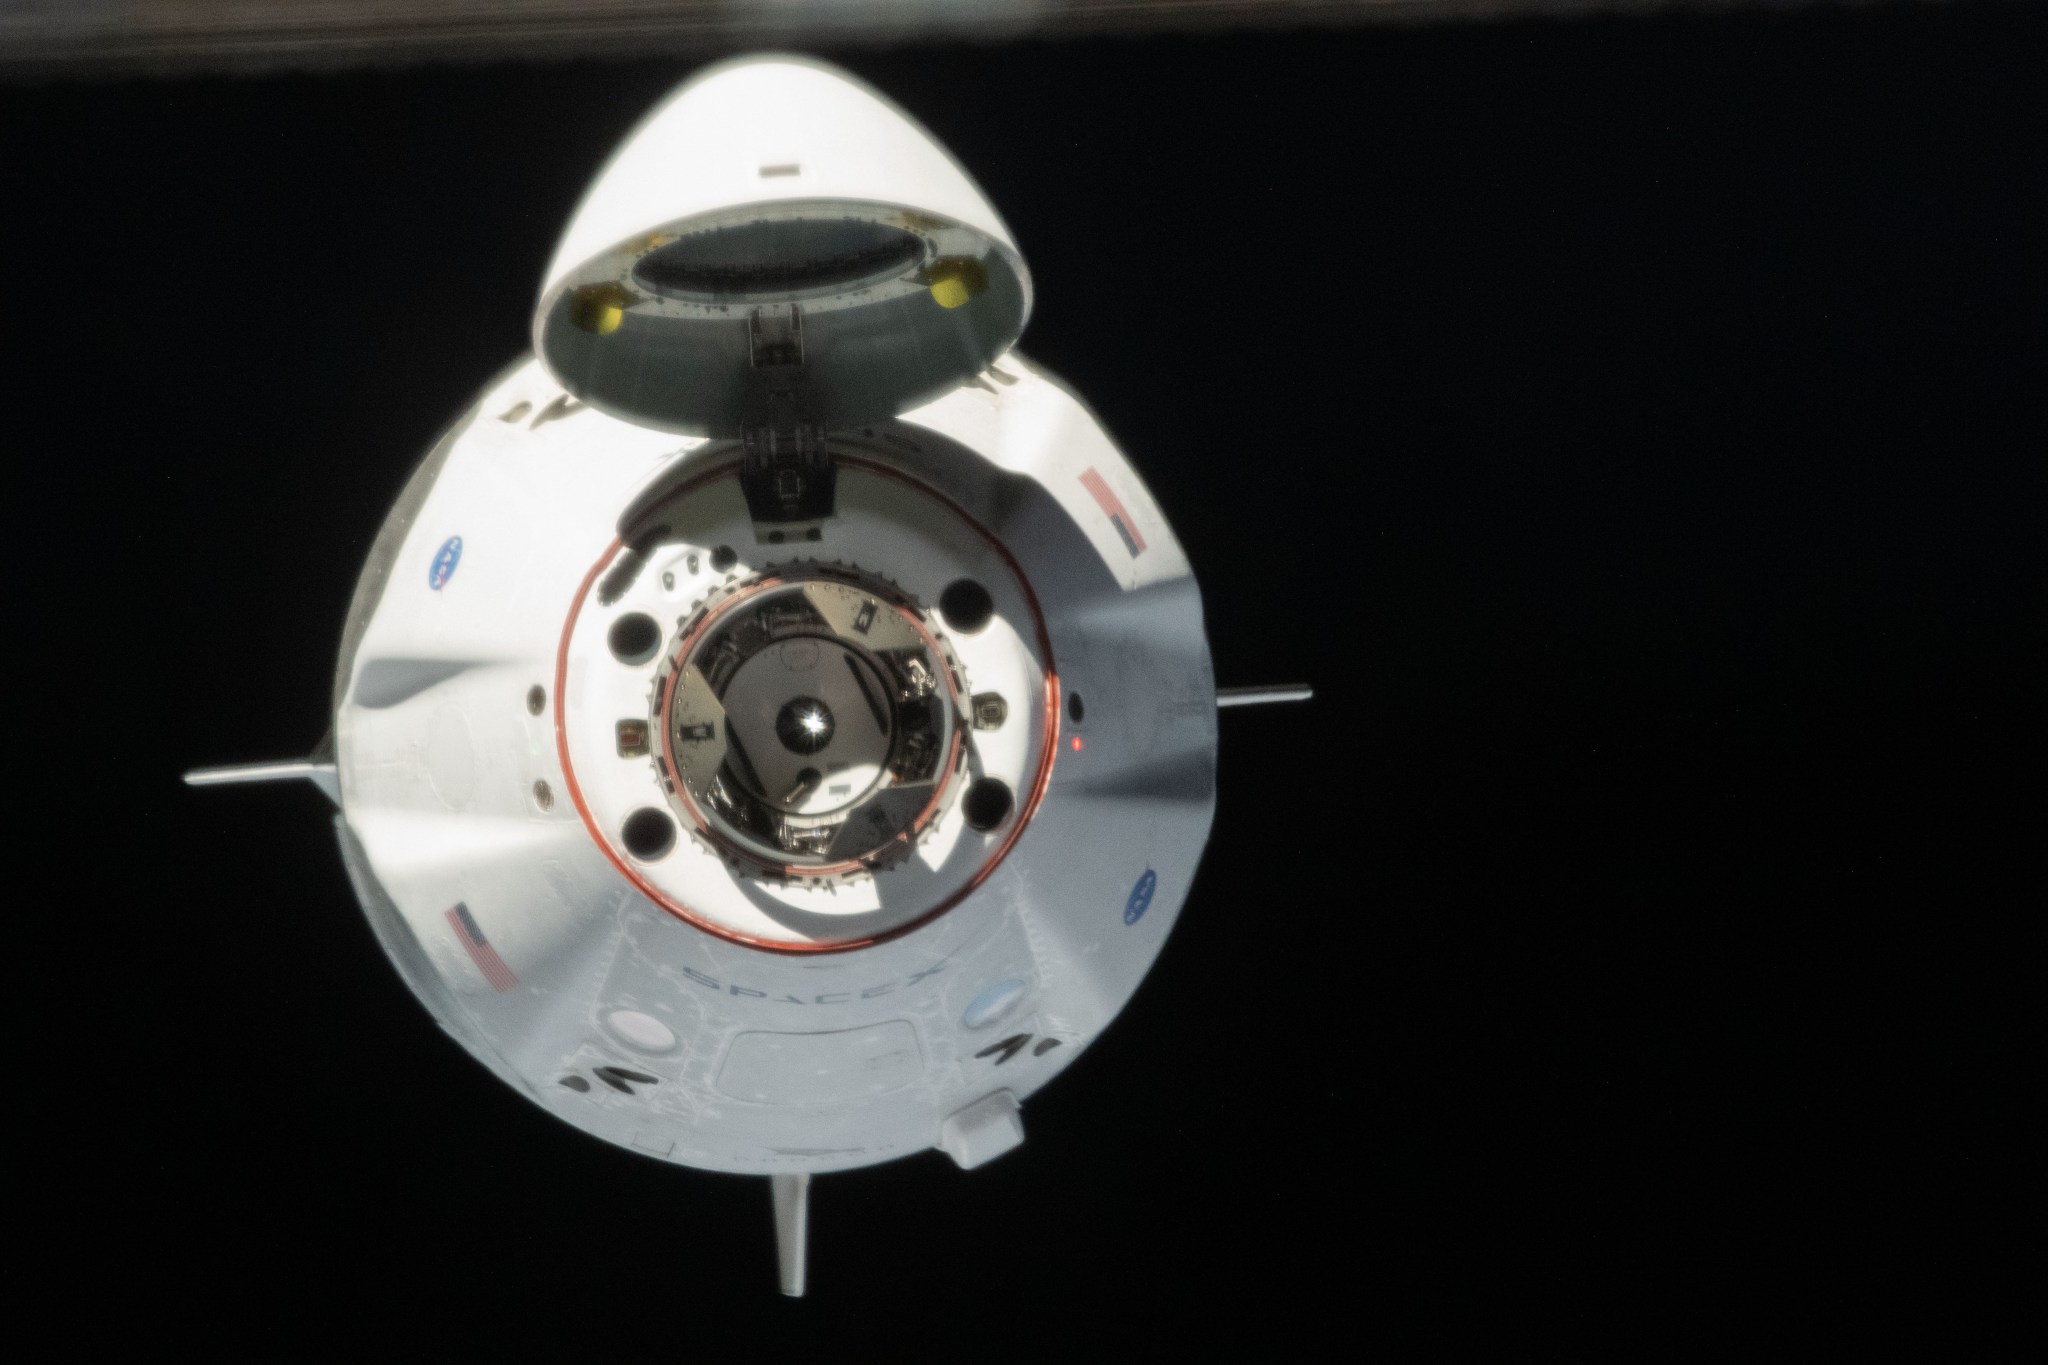  Vew from the front of the SpaceX Crew Dragon as it approaches the International Space Station for docking.